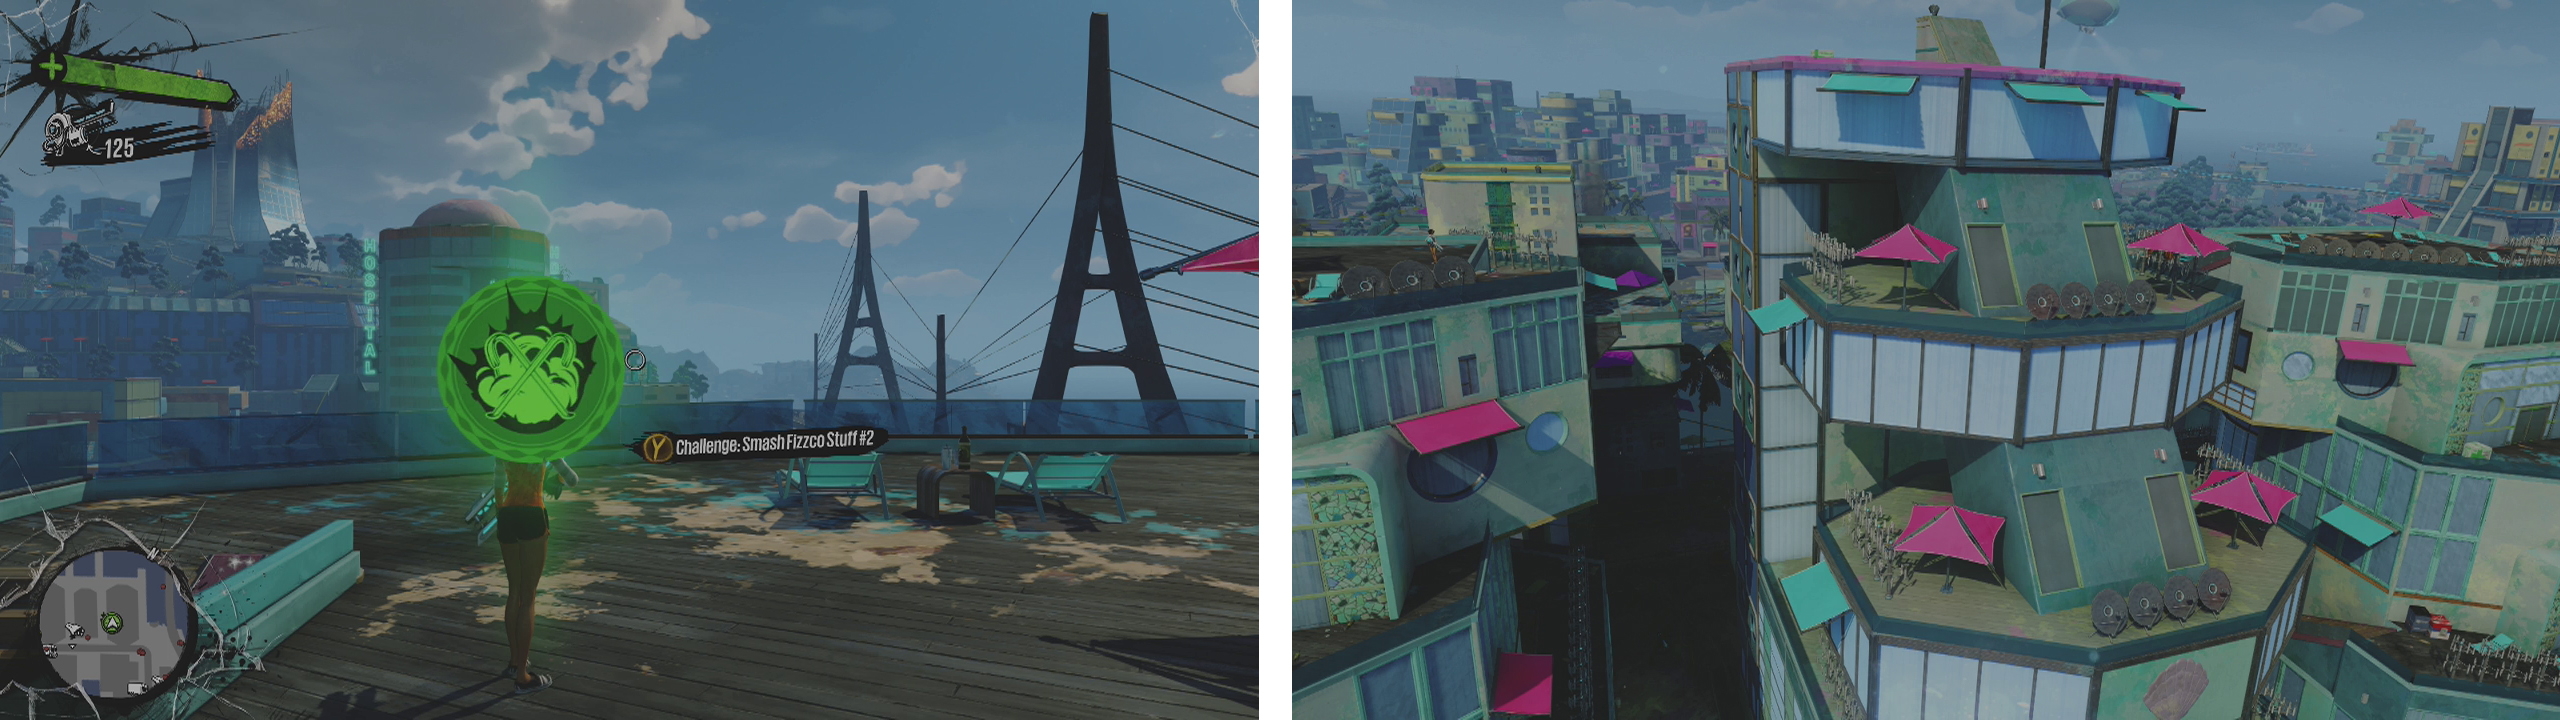 You can begin the challenge here (left). There are three tiers of balconies housing the destructibles (right) finding the right route takes trial, error and patience.